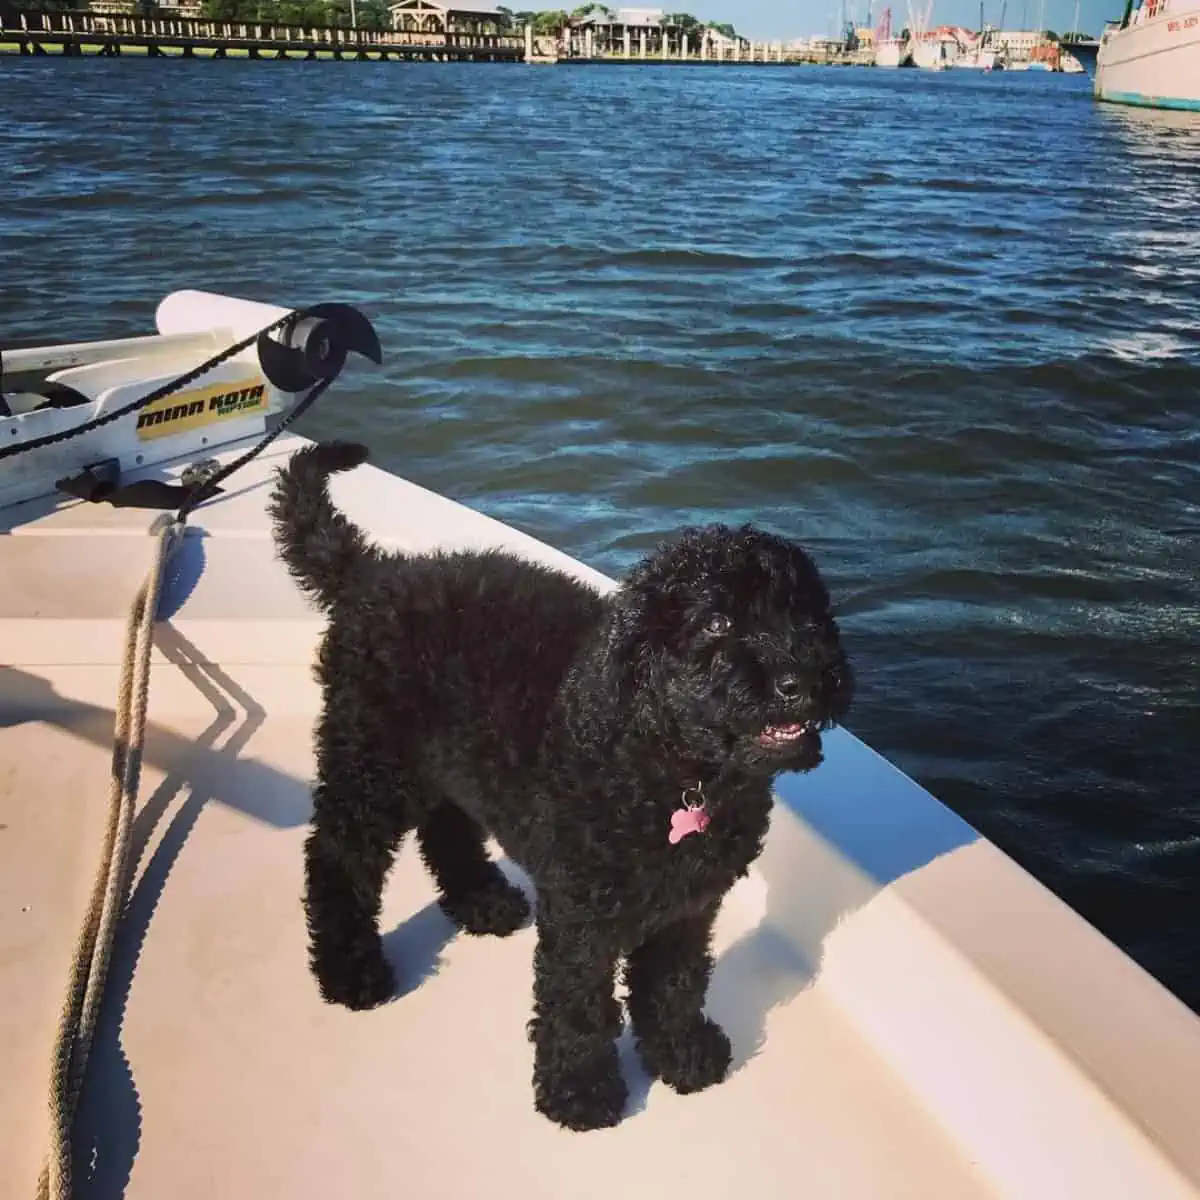 Goldendoodle puppy enjoys the boat